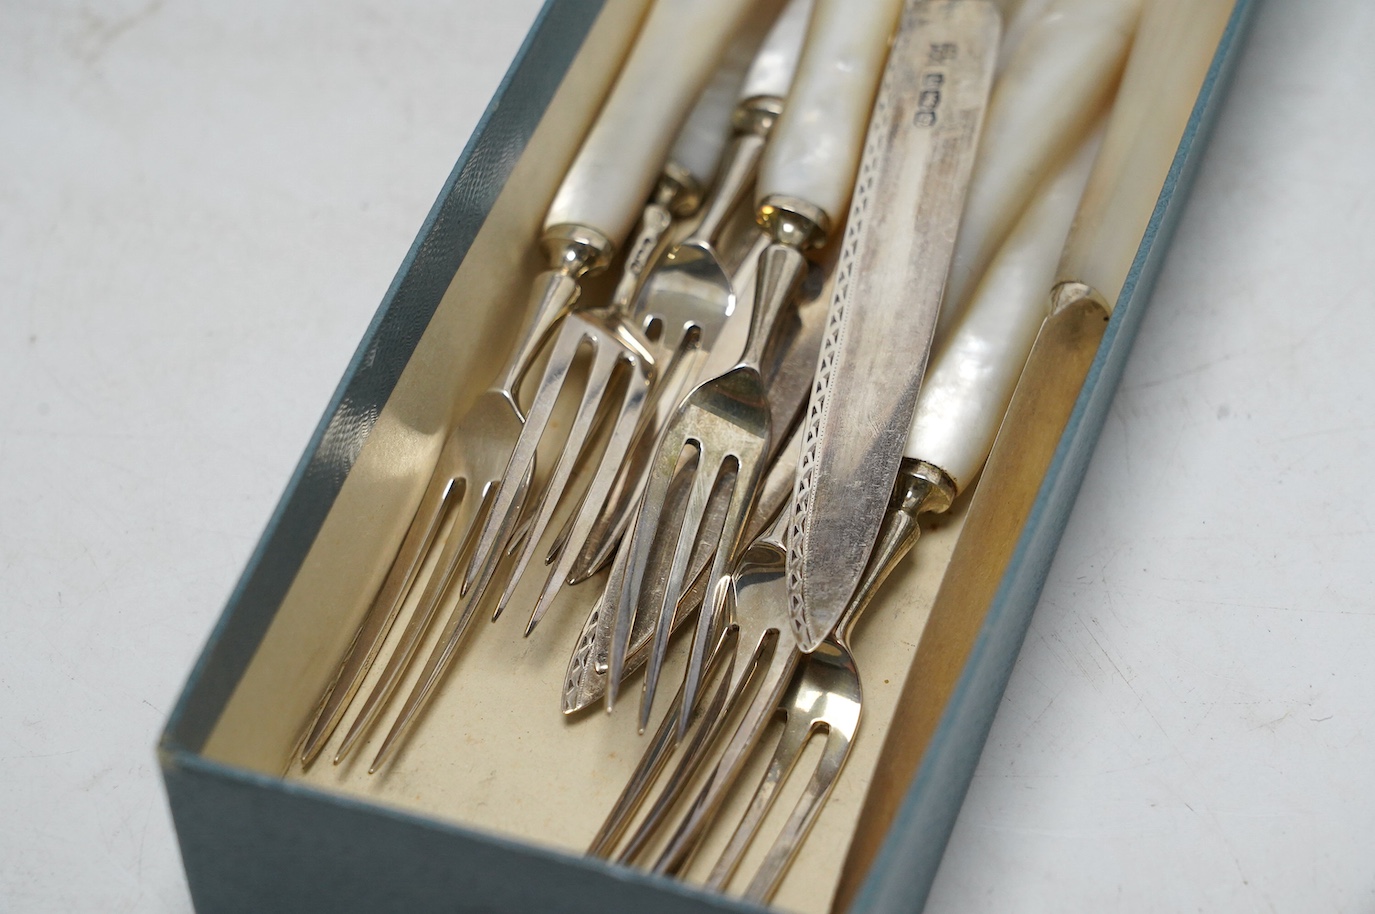 Six pairs of George V mother of pearl handled silver dessert eaters, Frederick C. Asman & Co, Sheffield, 1925, knife 18.9cm. Condition - fair to good